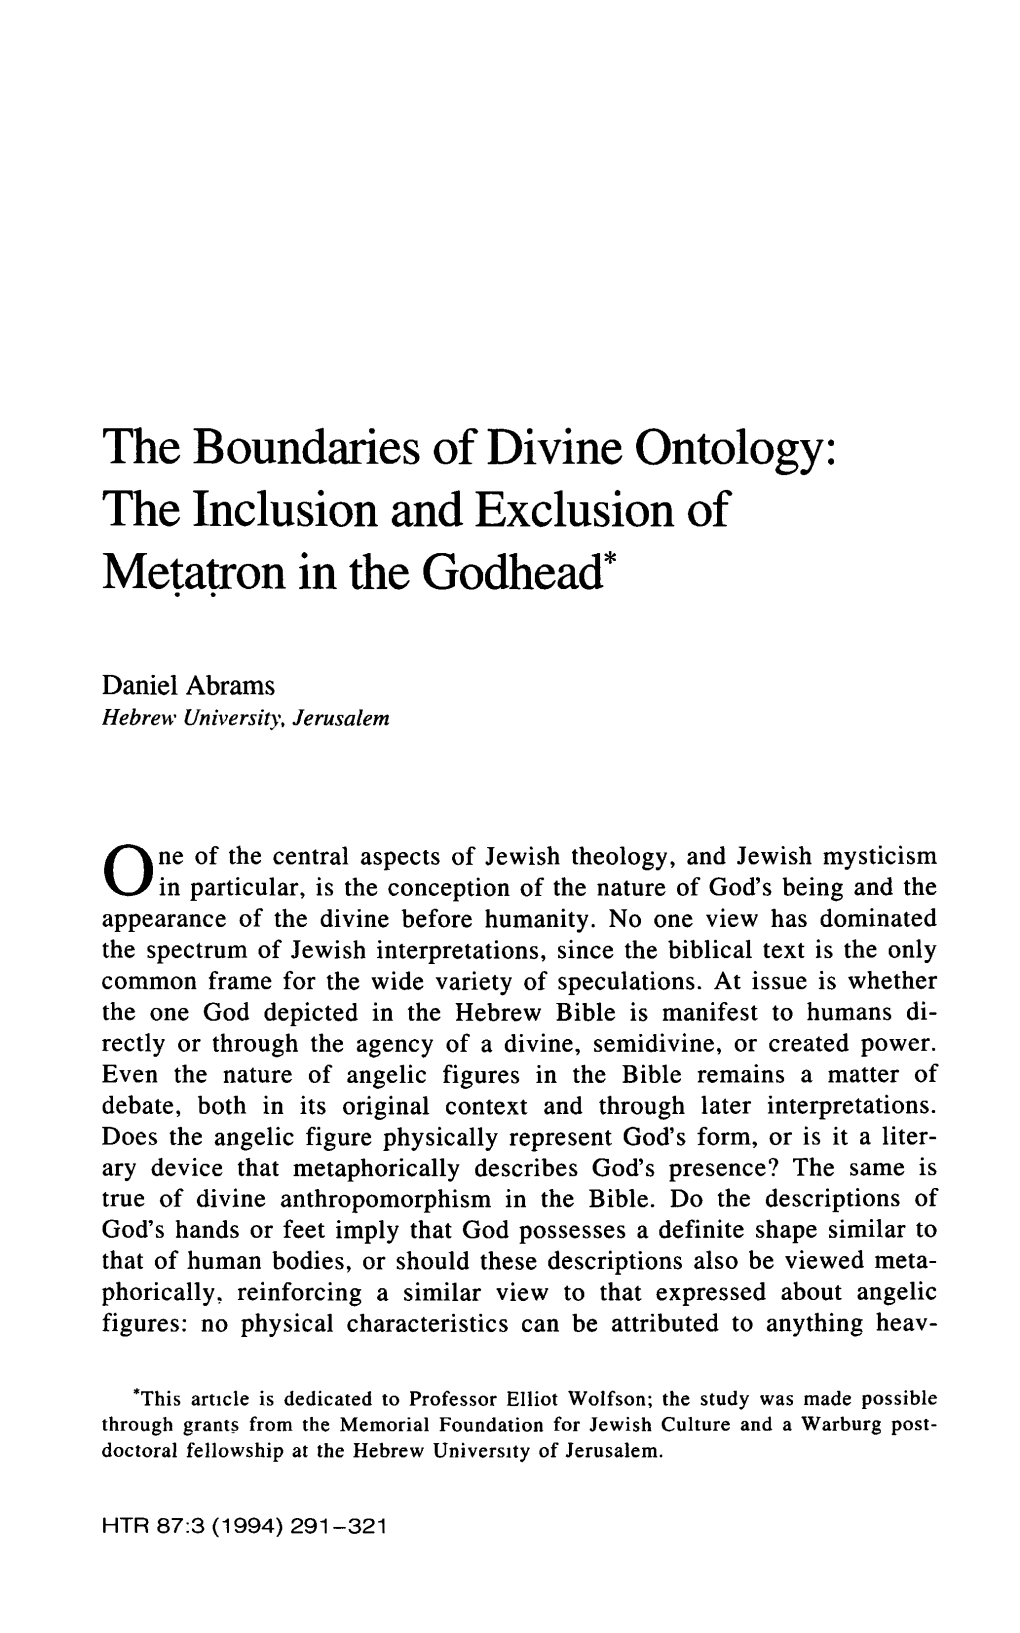 The Boundaries of Divine Ontology: the Inclusion and Exclusion of Metatron in the Godhead*